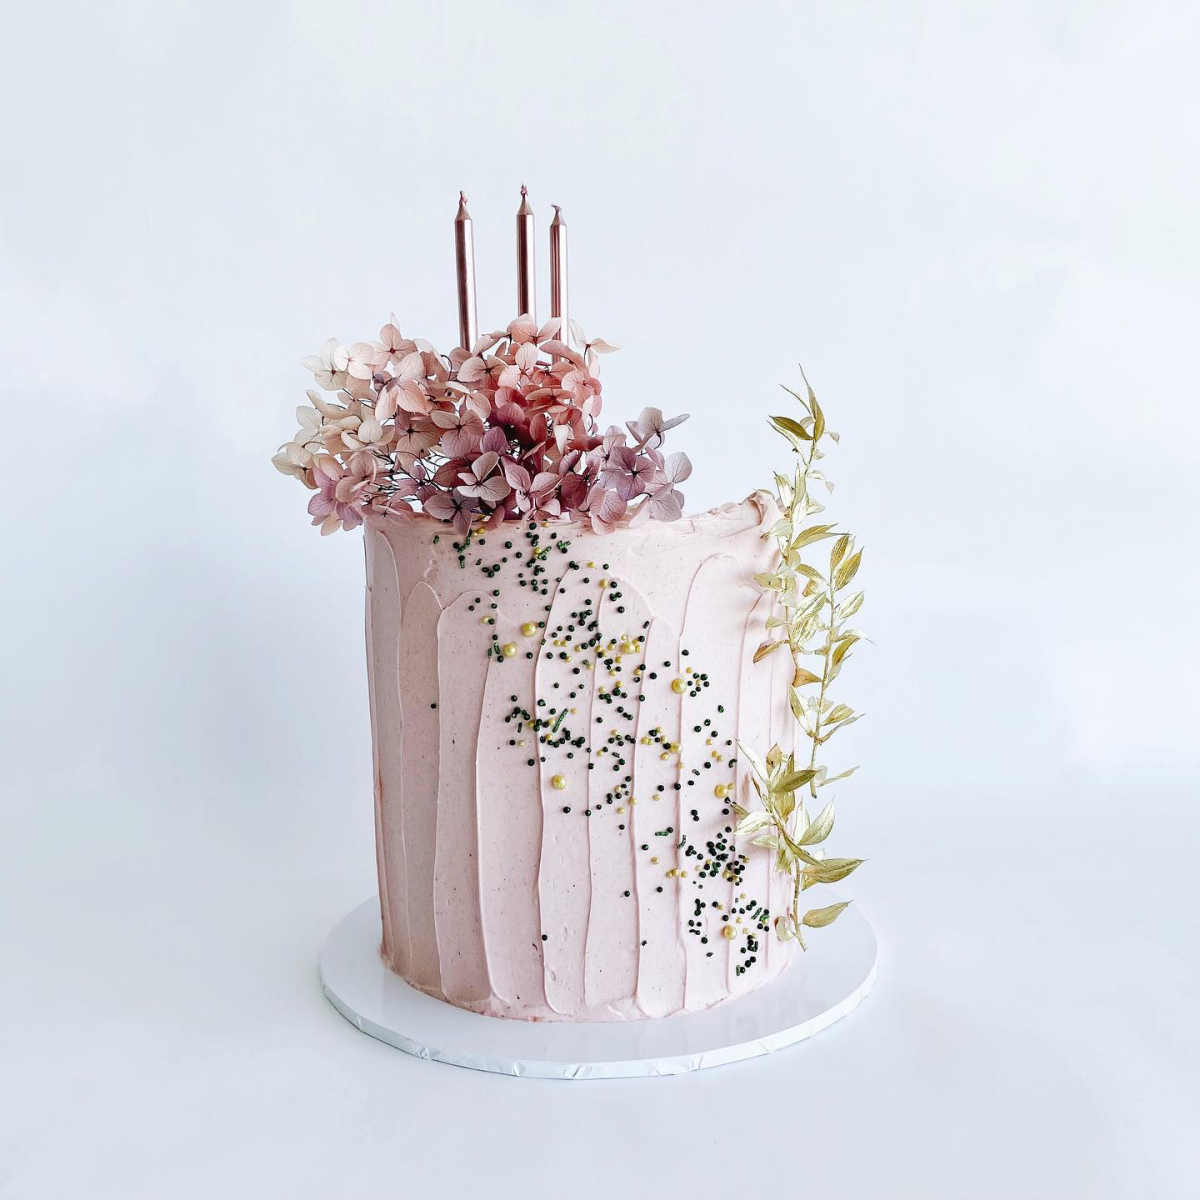 textured cake with preserved florals